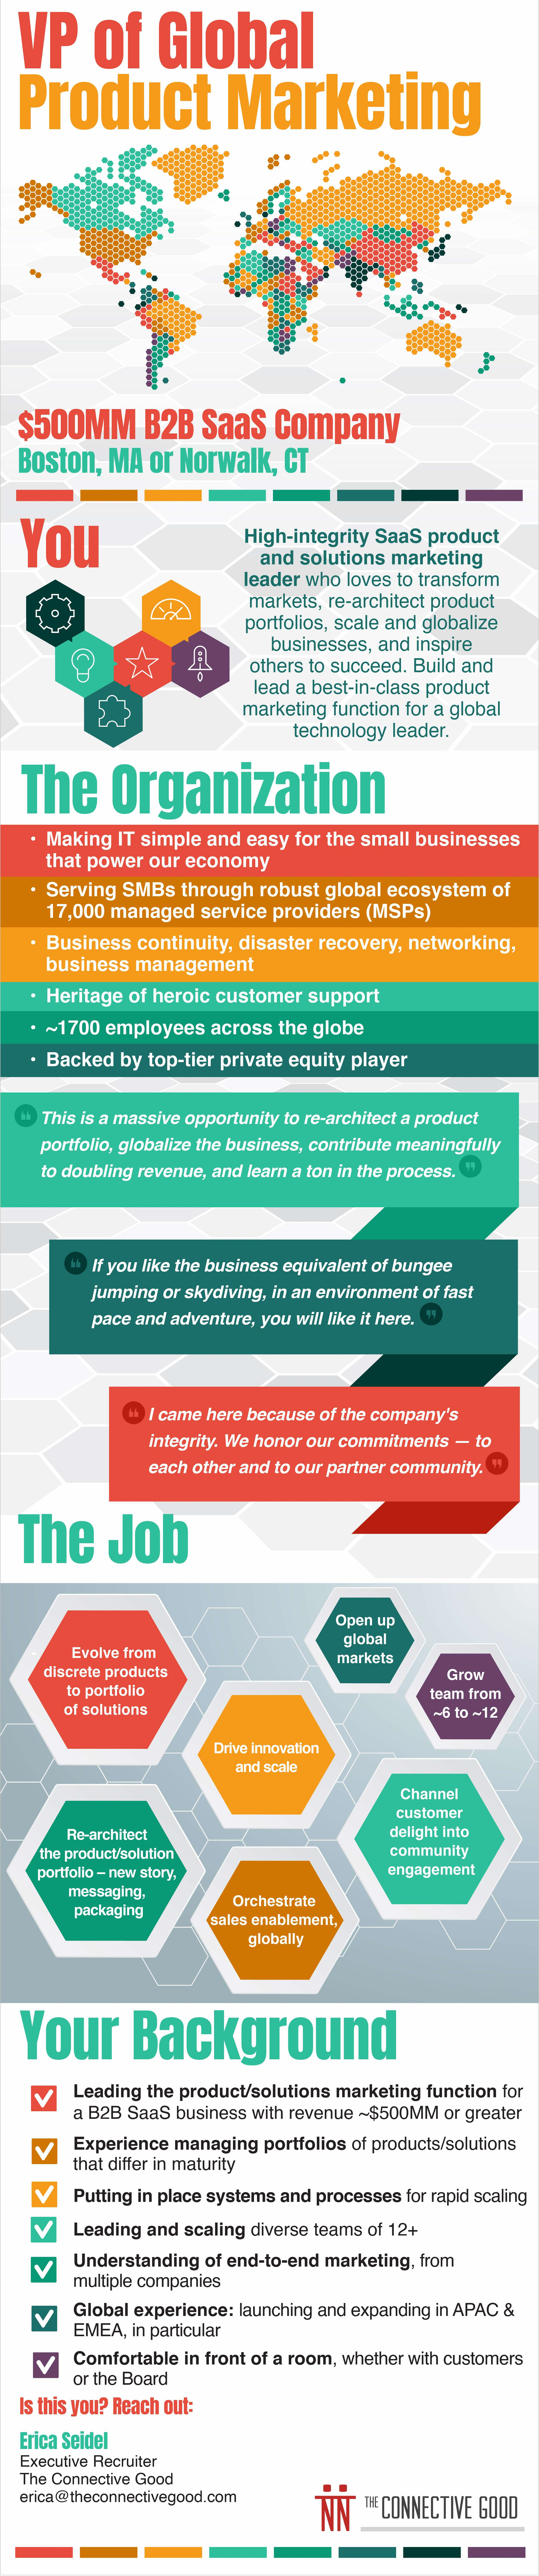 Infographic - VP of Global Product Marketing